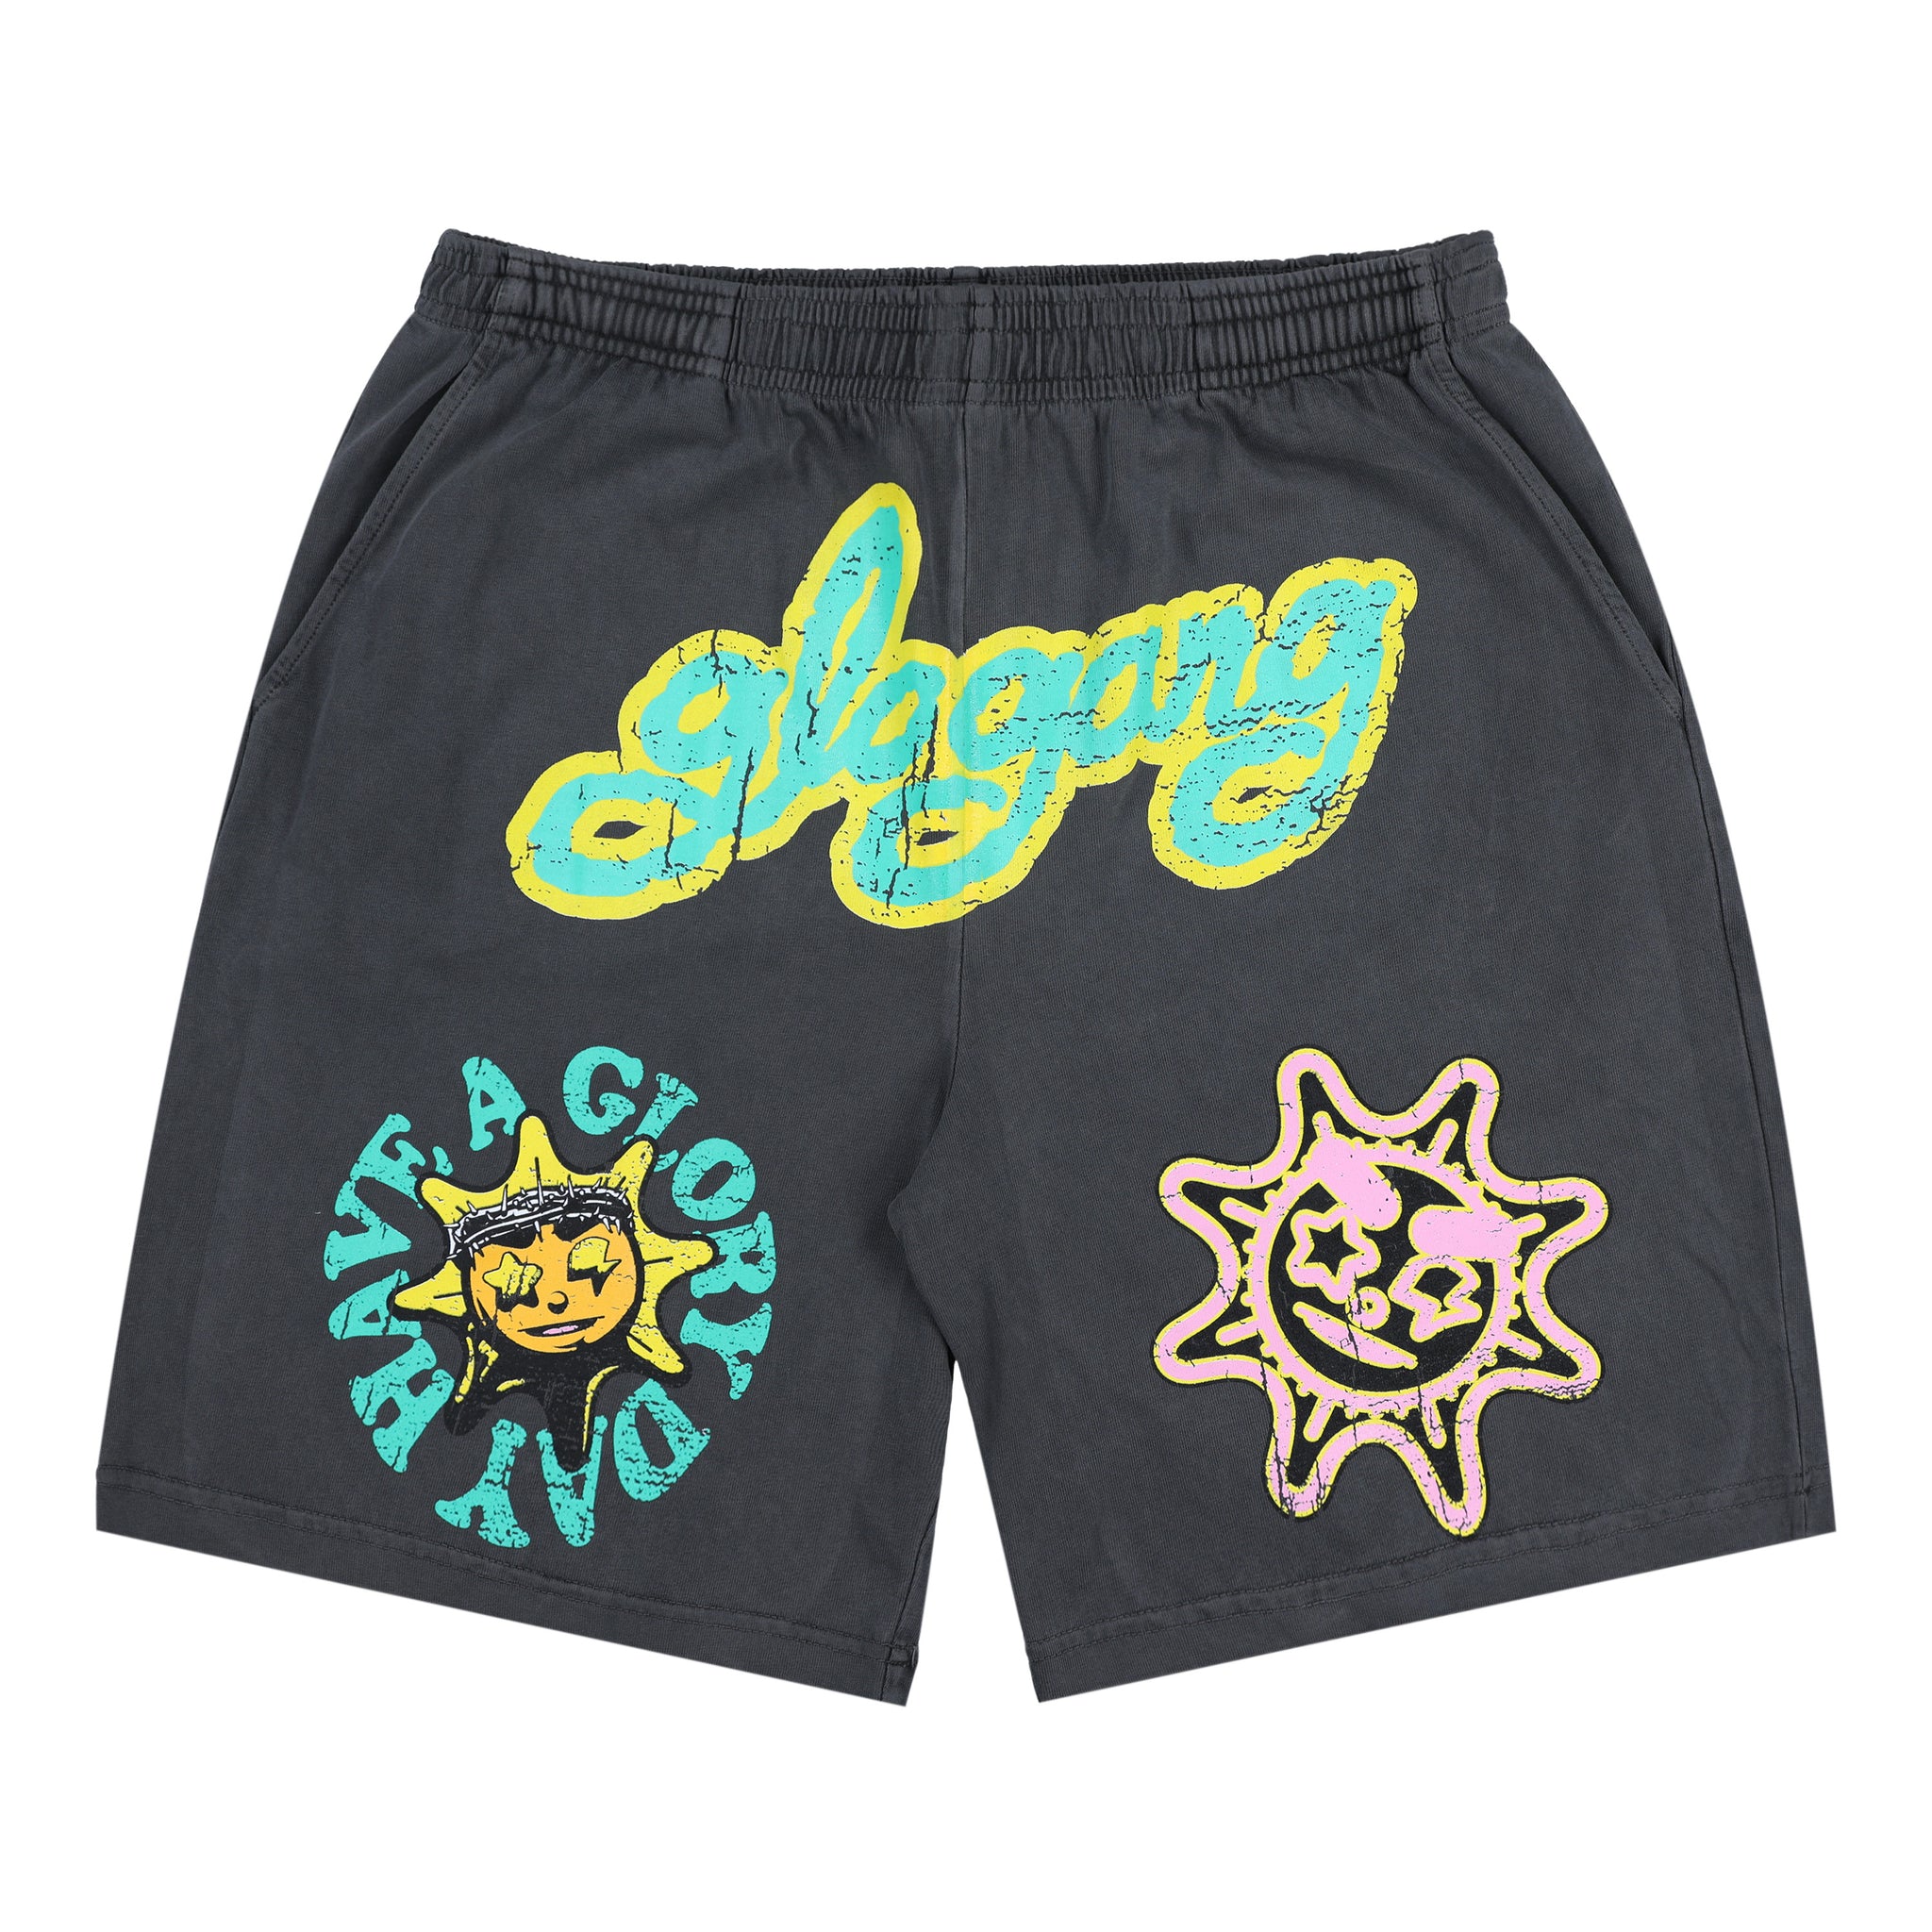 Have A Glory Day Shorts (Black)